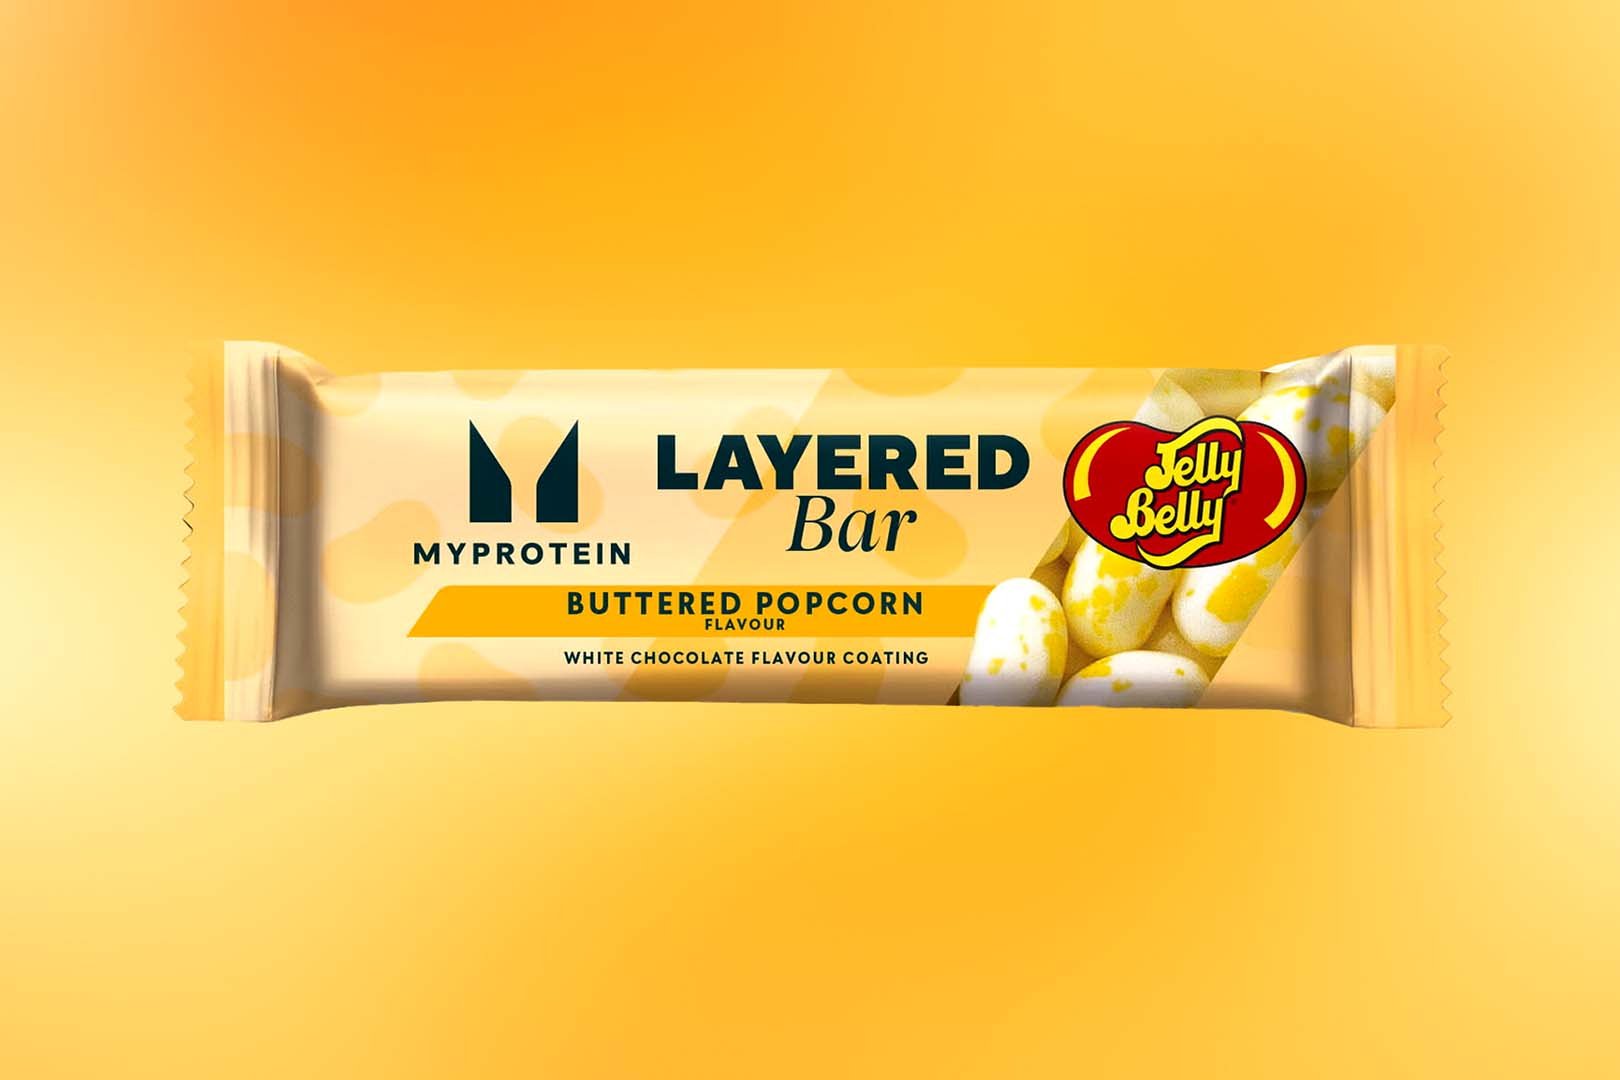 Myprotein Jelly Belly Buttered Popcorn Layered Protein Bar